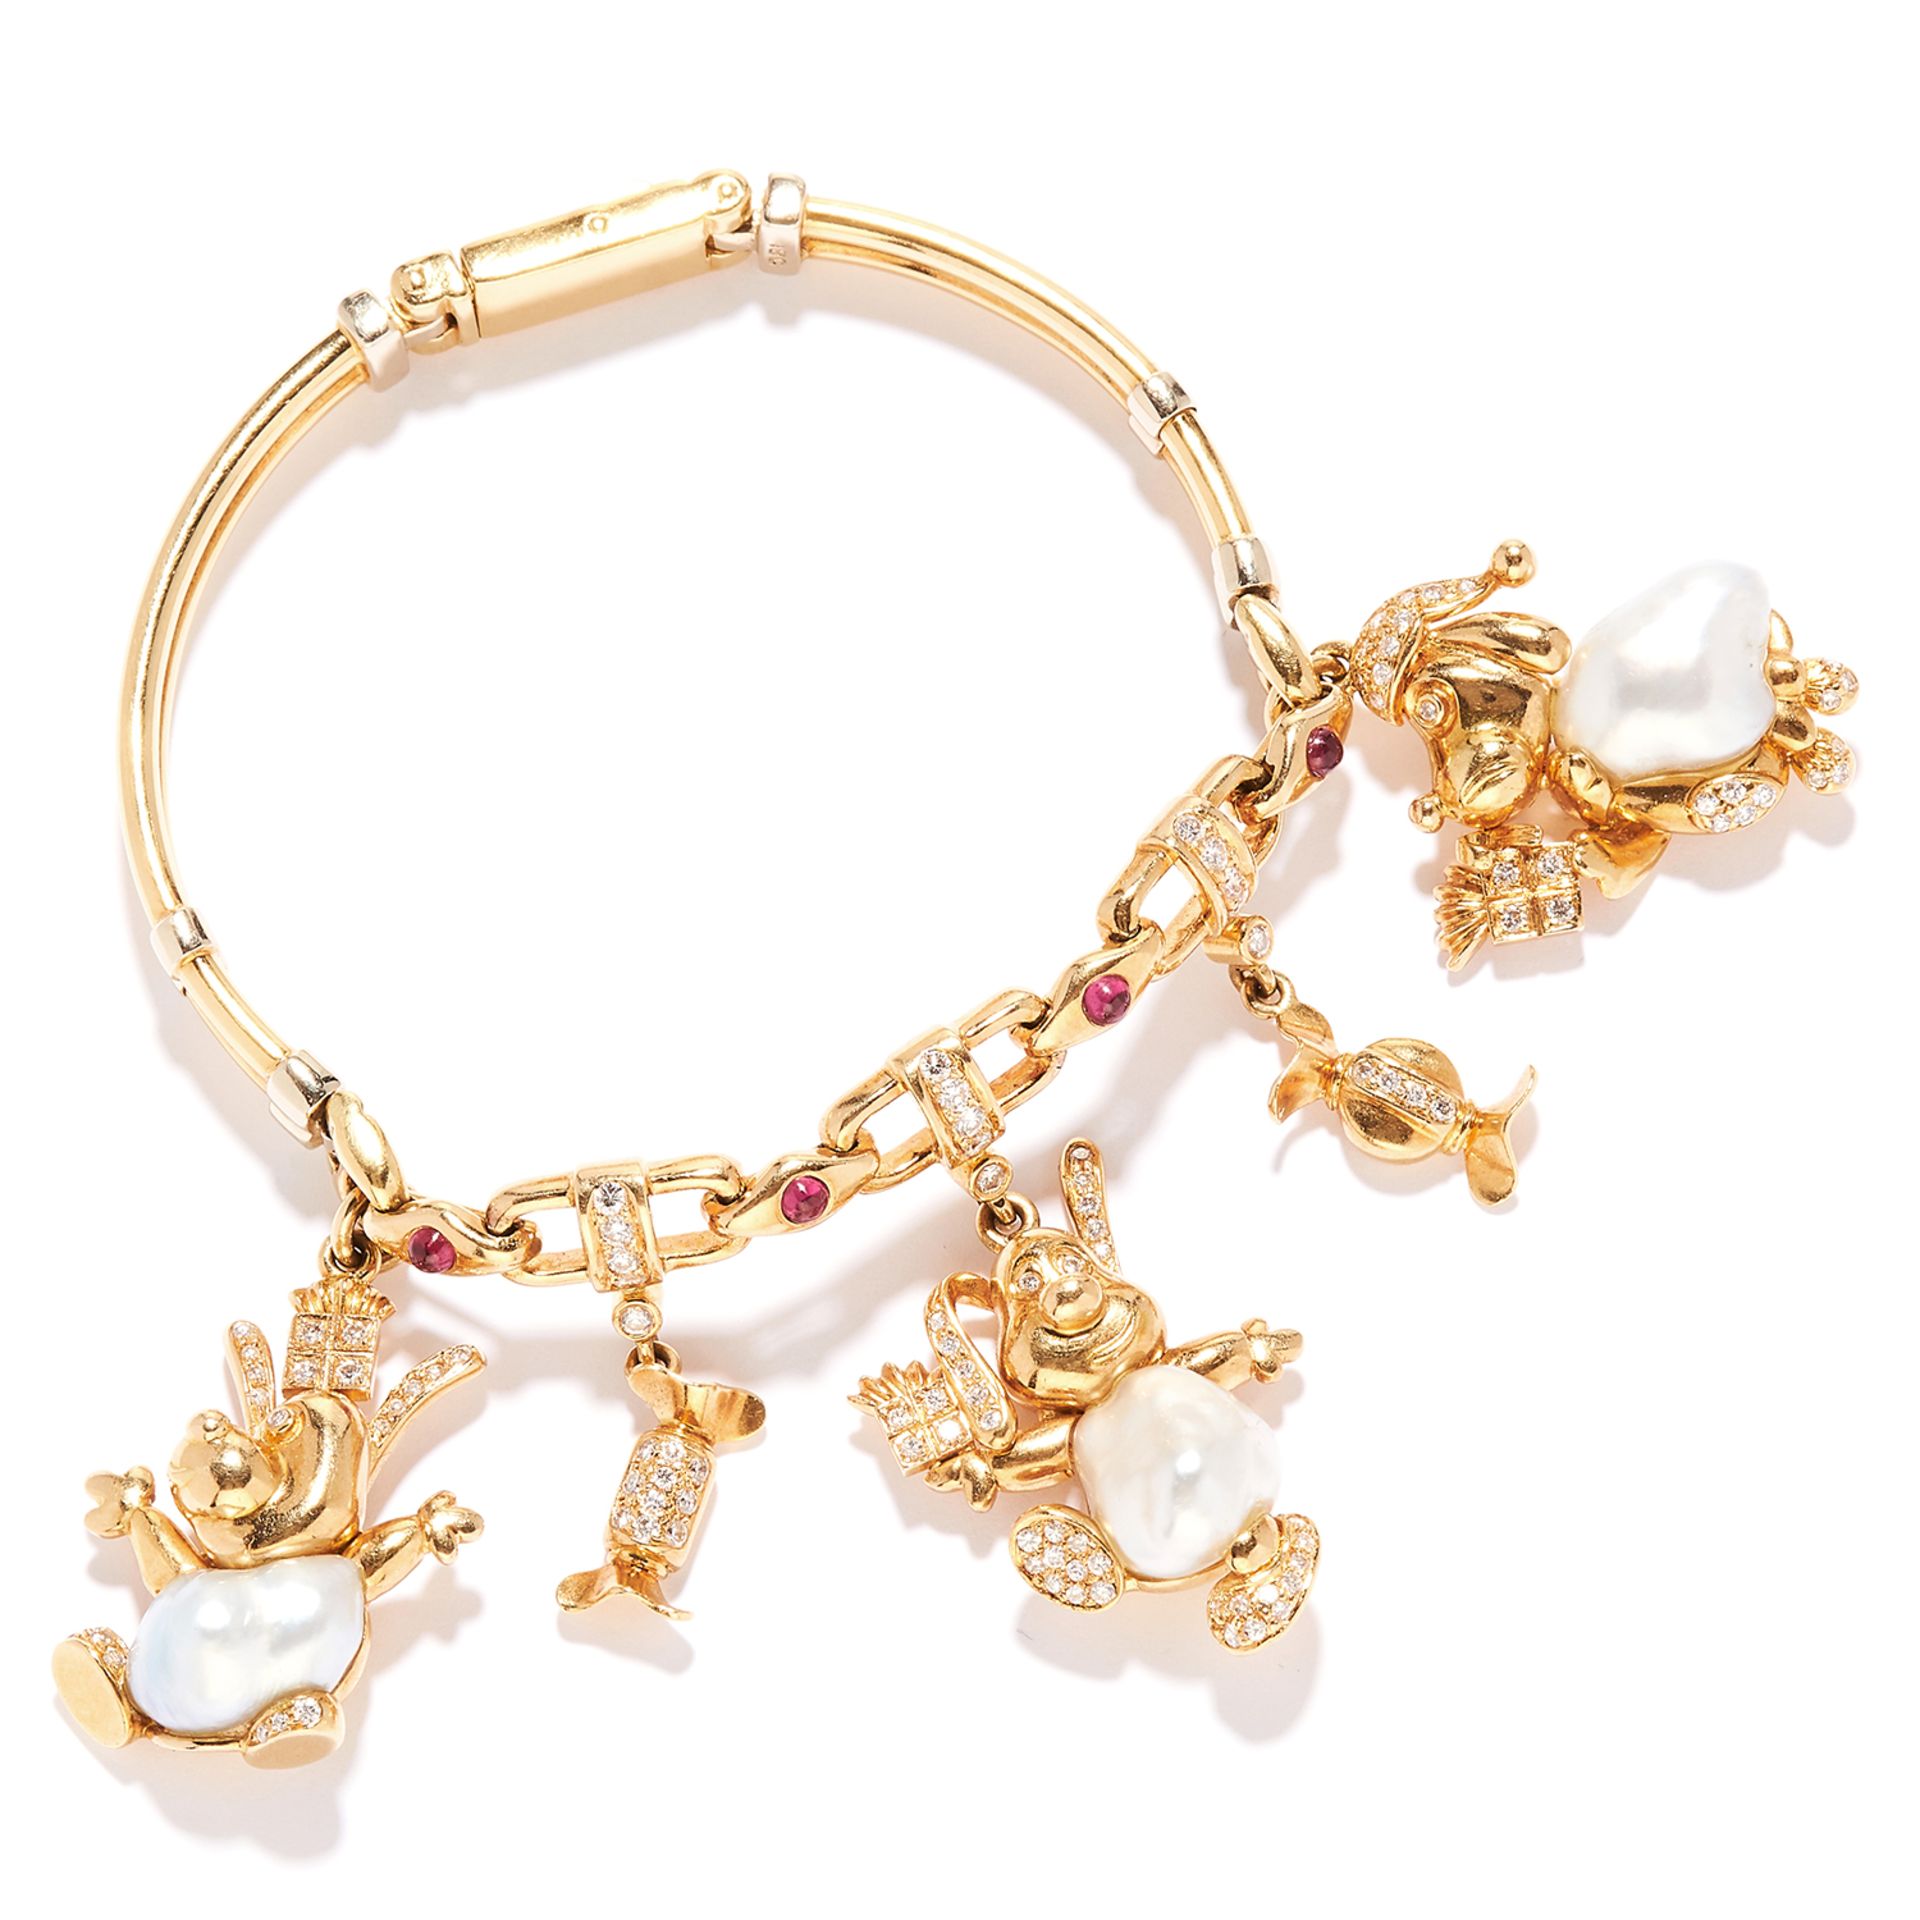 PEARL, RUBY AND DIAMOND CHARM BRACELET in 18ct yellow gold, the fancy link bracelet suspending